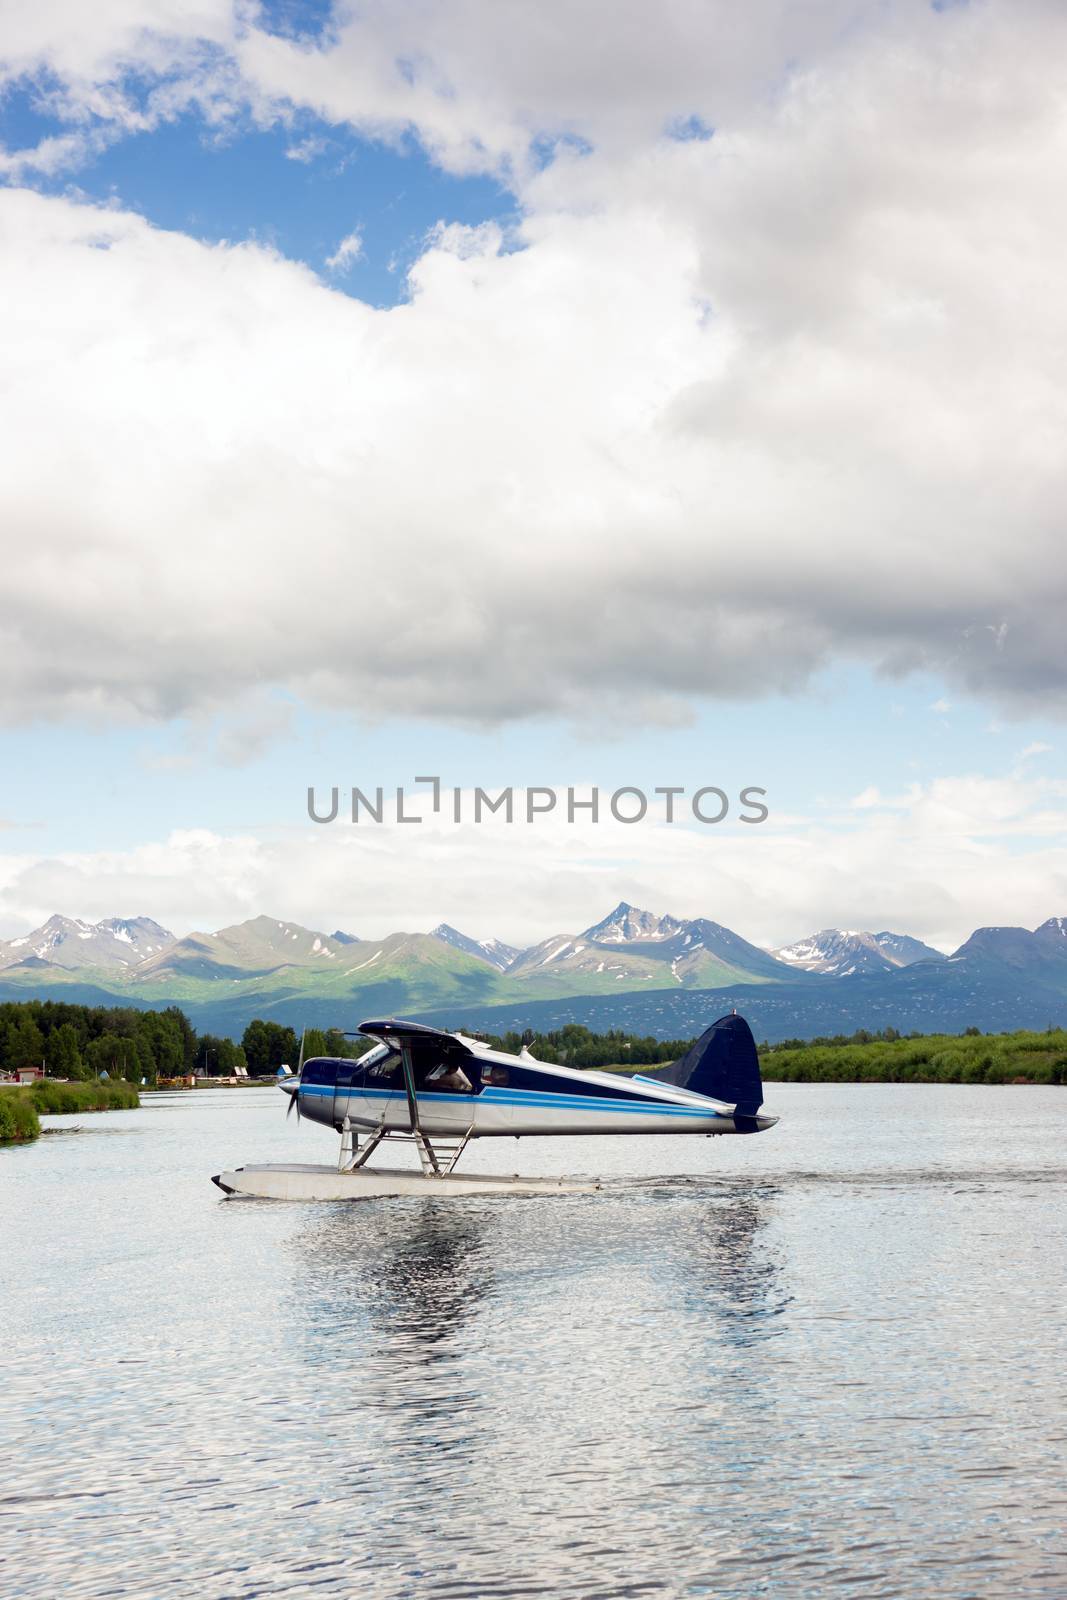 A bush plane performs take off in Alaska with Chugach Mountains in the Background